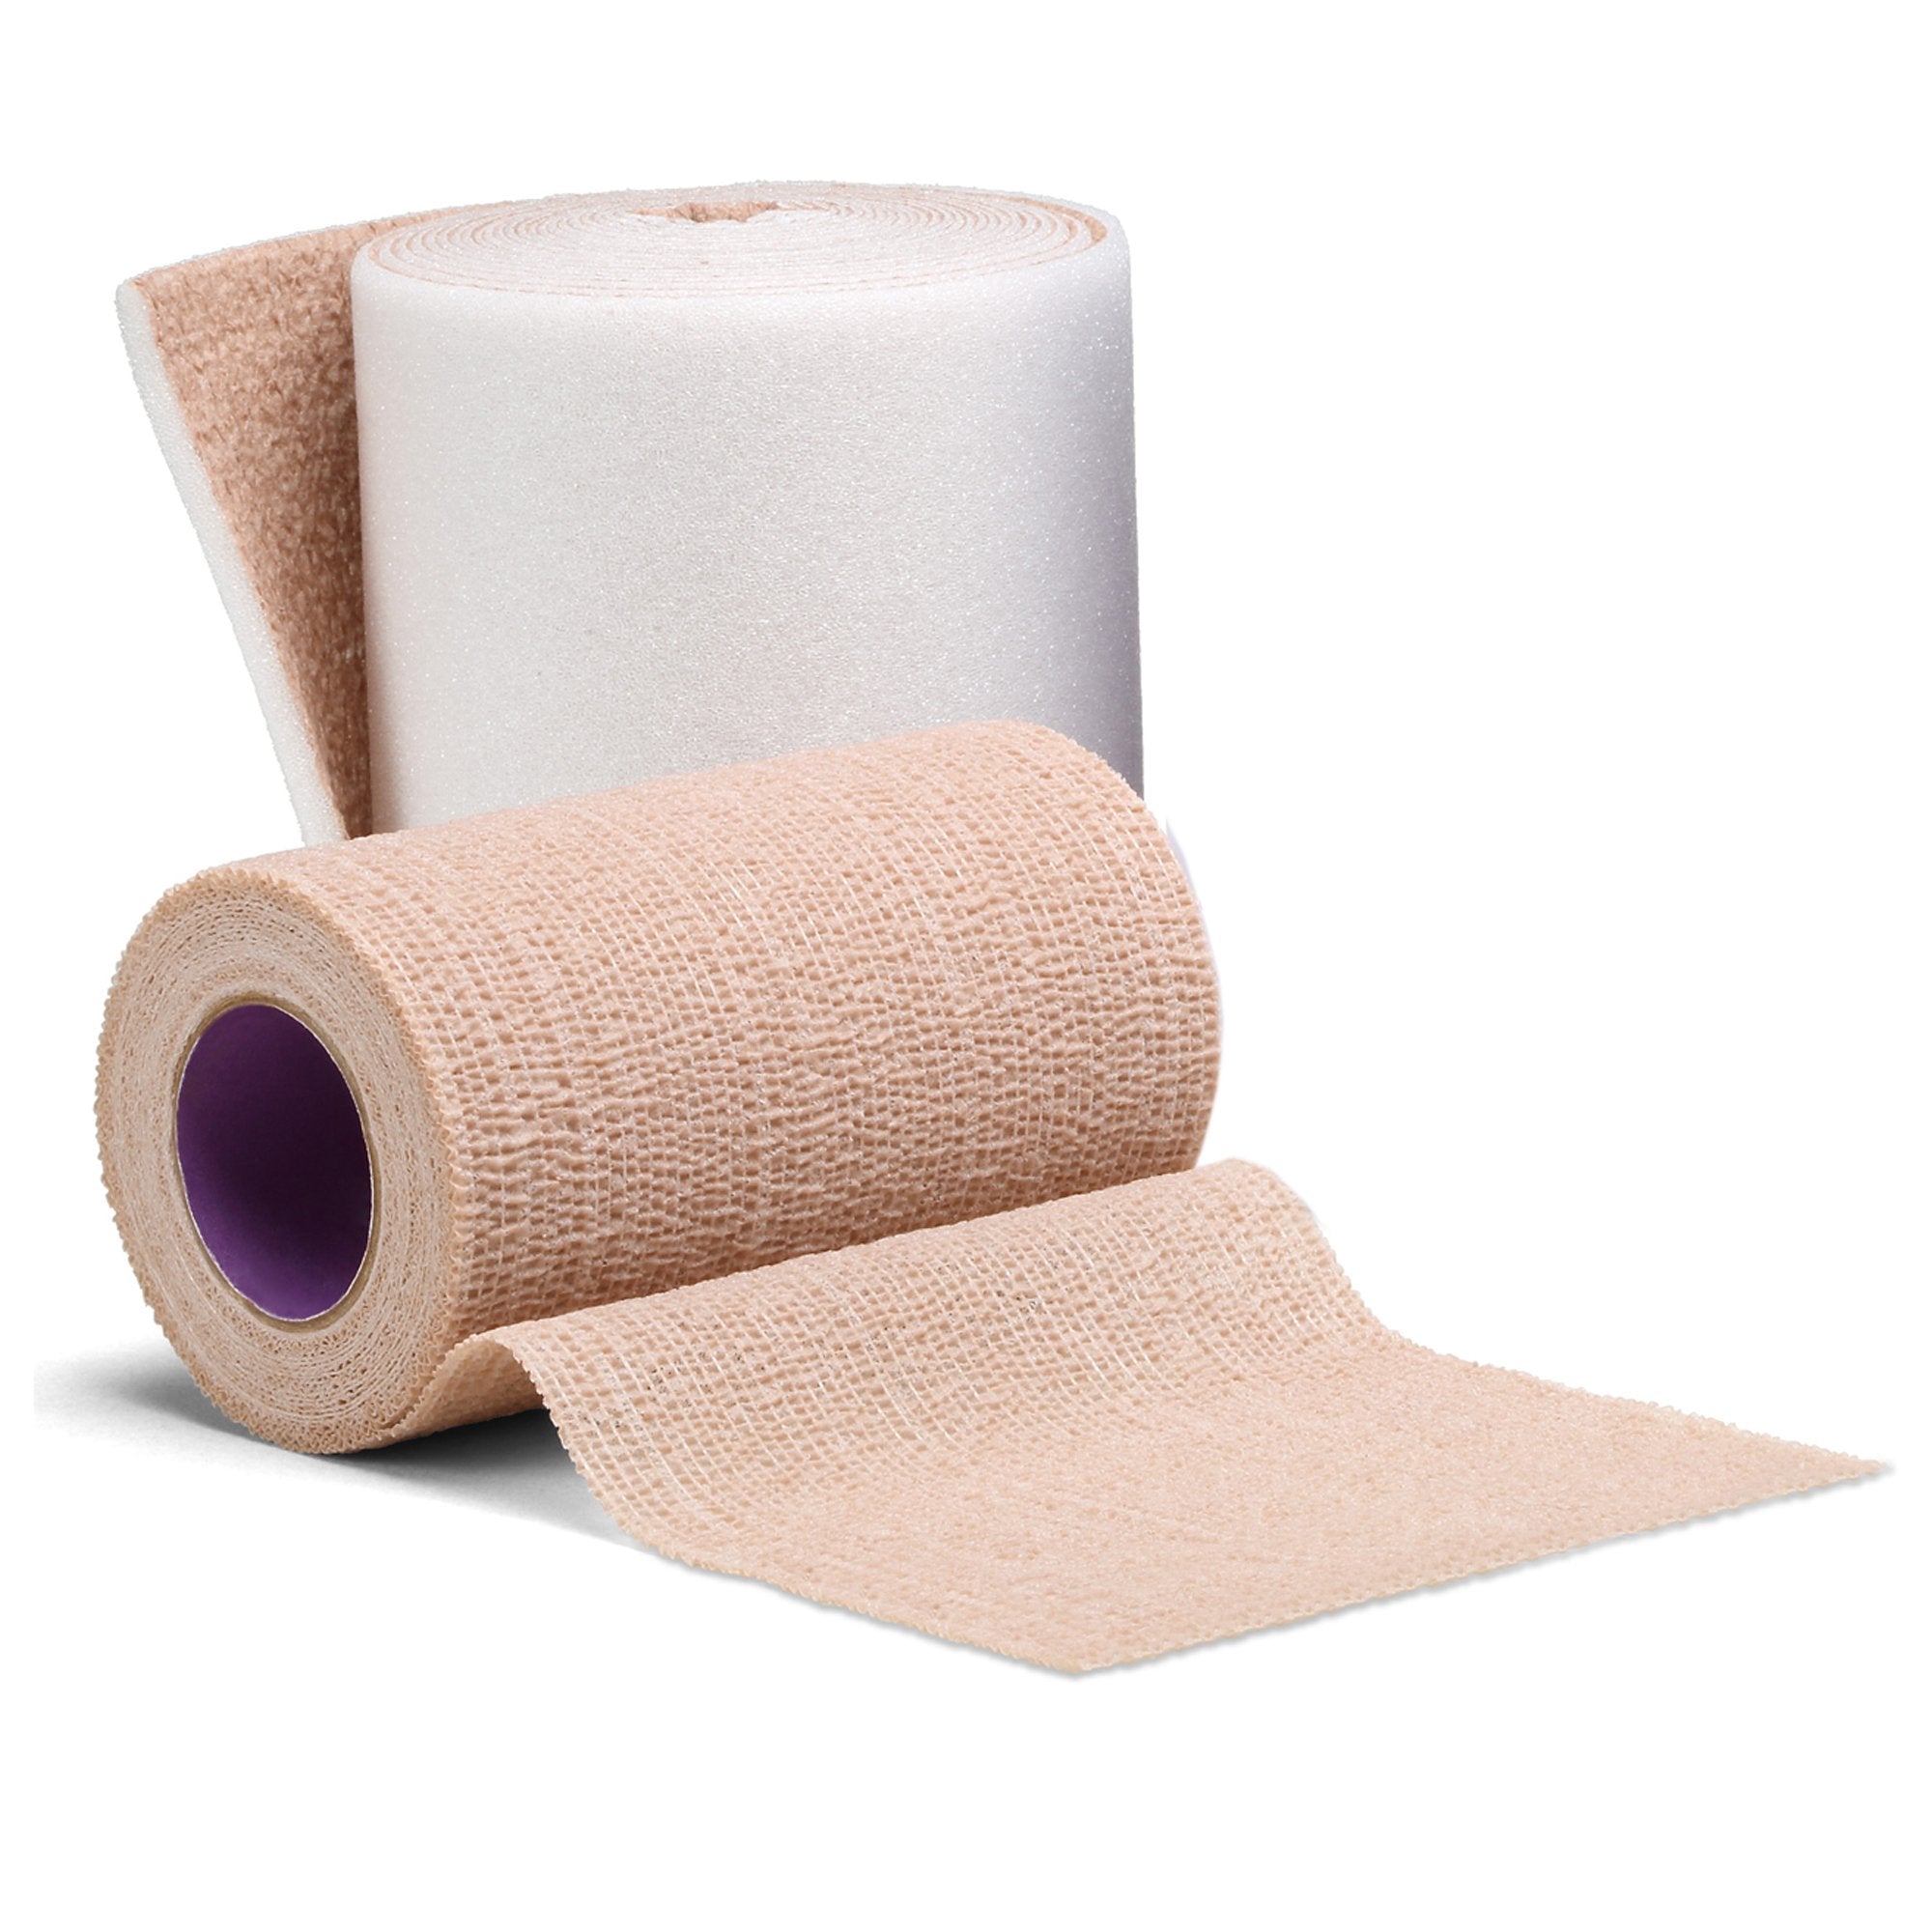 2 Layer Compression Bandage System 3M™ Coban™ 2 4 Inch X 3-4/5 Yard / 4 Inch X 6-3/10 Yard Self-Adherent / Pull On Closure Tan / White NonSterile 35 to 40 mmHg